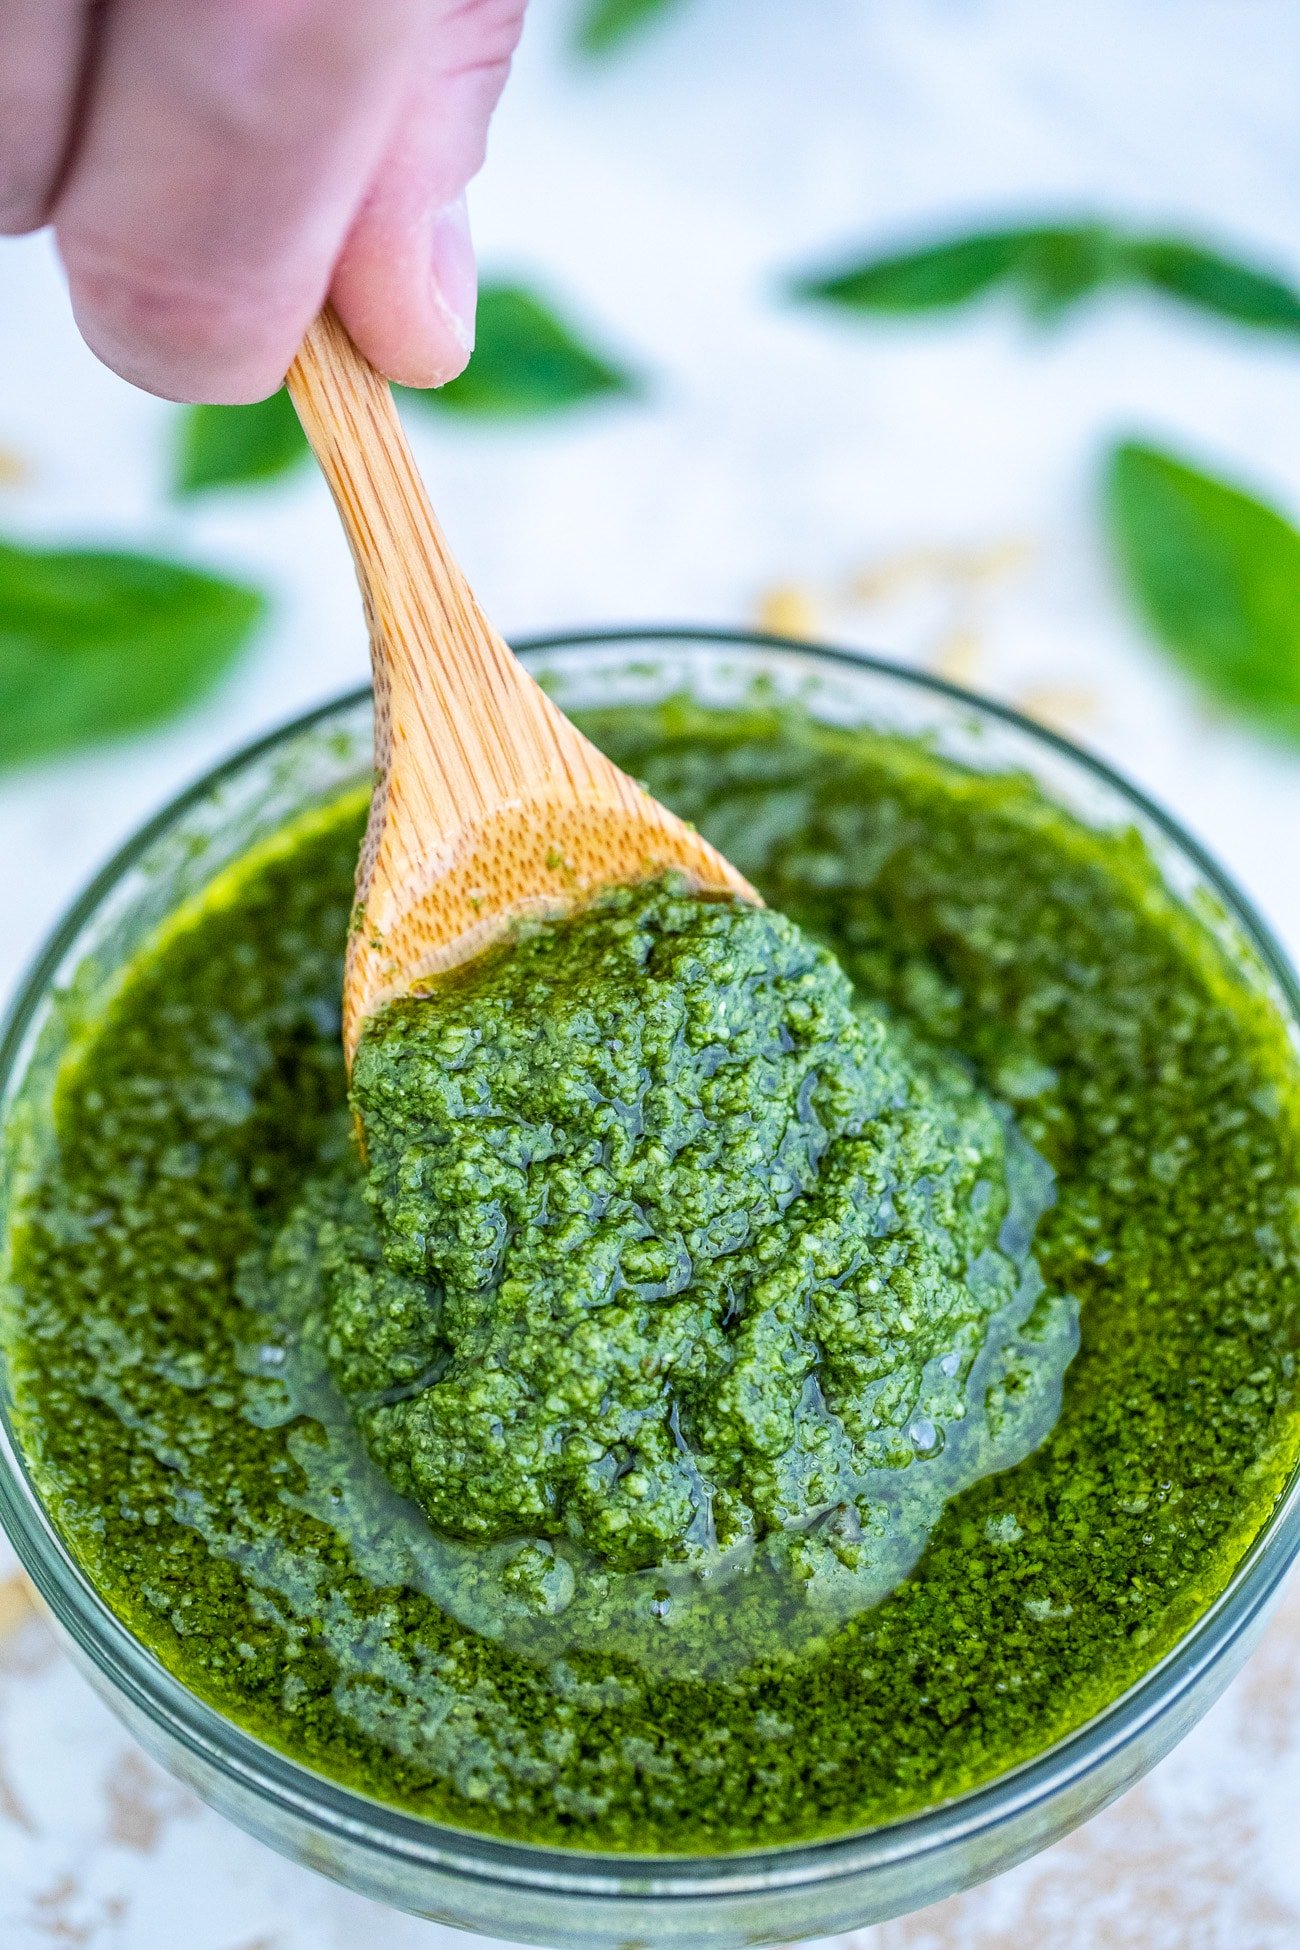 How to Make Pesto [Video] - Sweet and Savory Meals